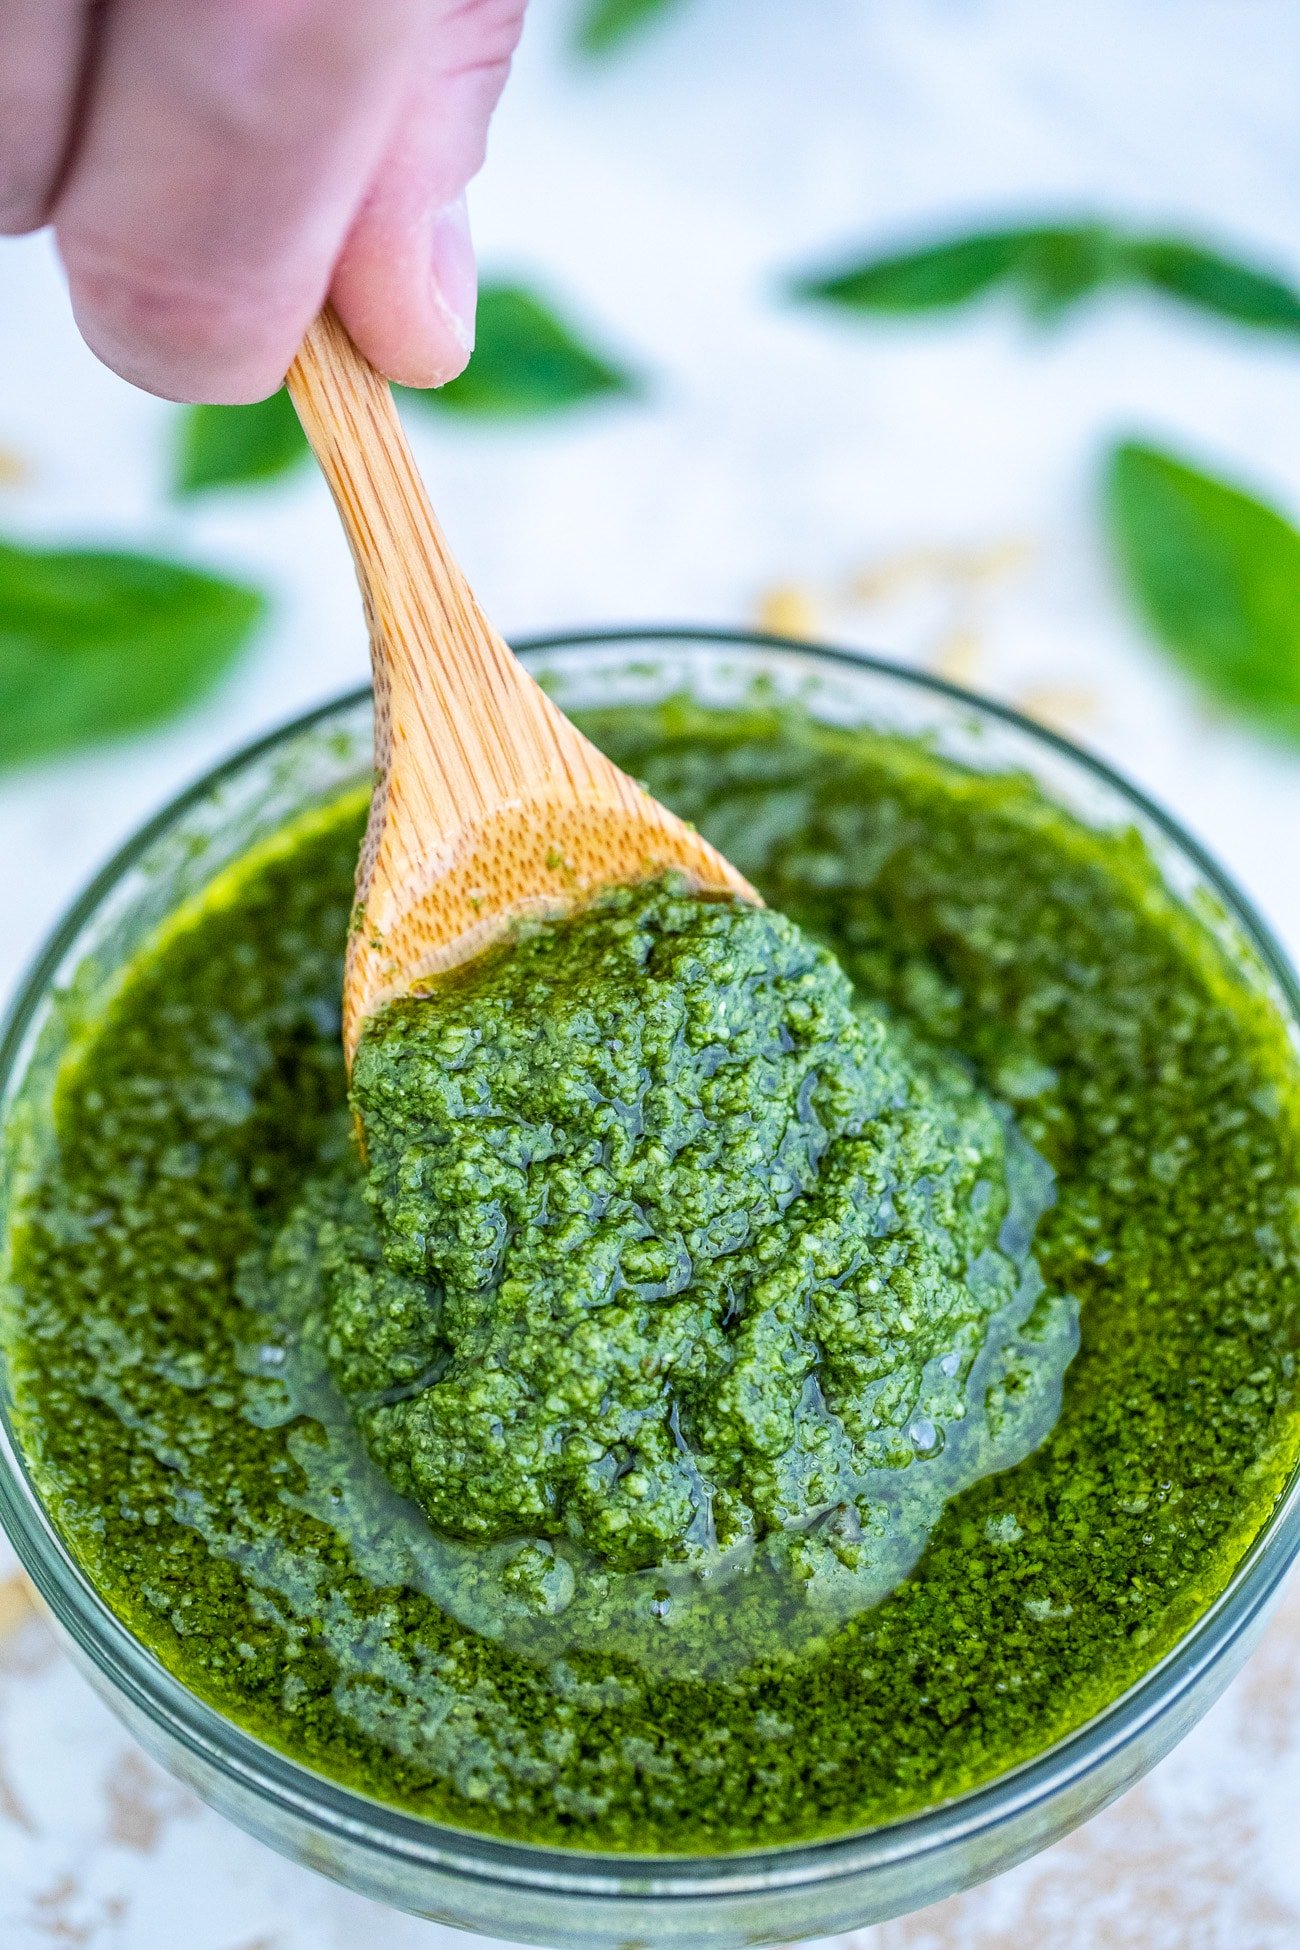 How to Make Pesto [Video] - Sweet and Savory Meals